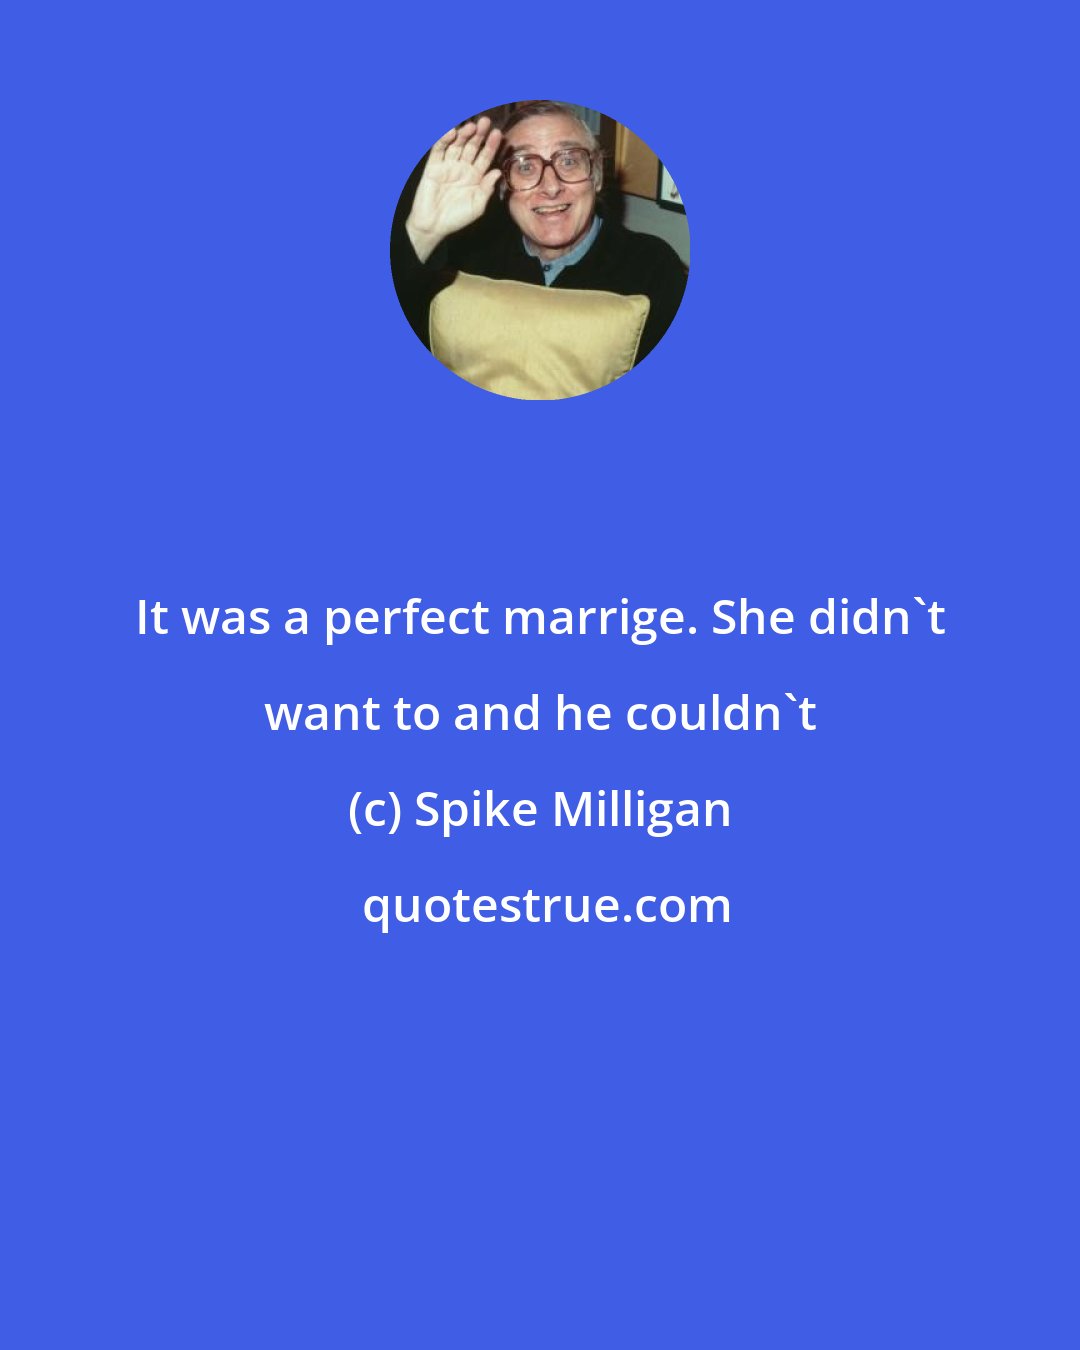 Spike Milligan: It was a perfect marrige. She didn`t want to and he couldn`t